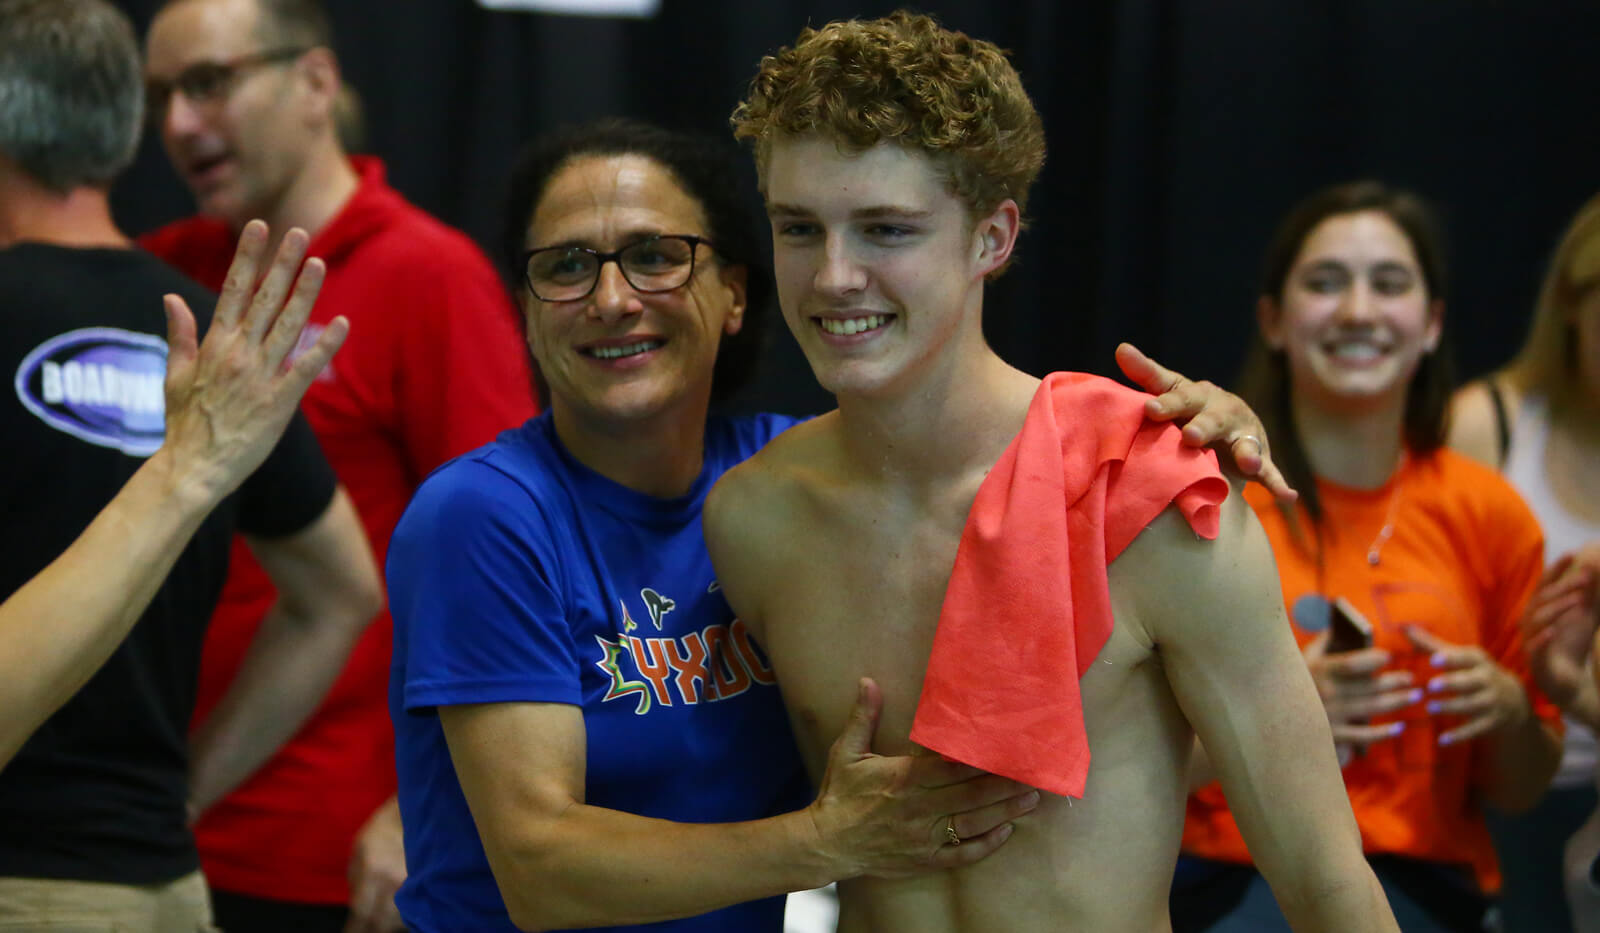 Windsor: Rylan Wiens claims his first senior national title with perfect final dive